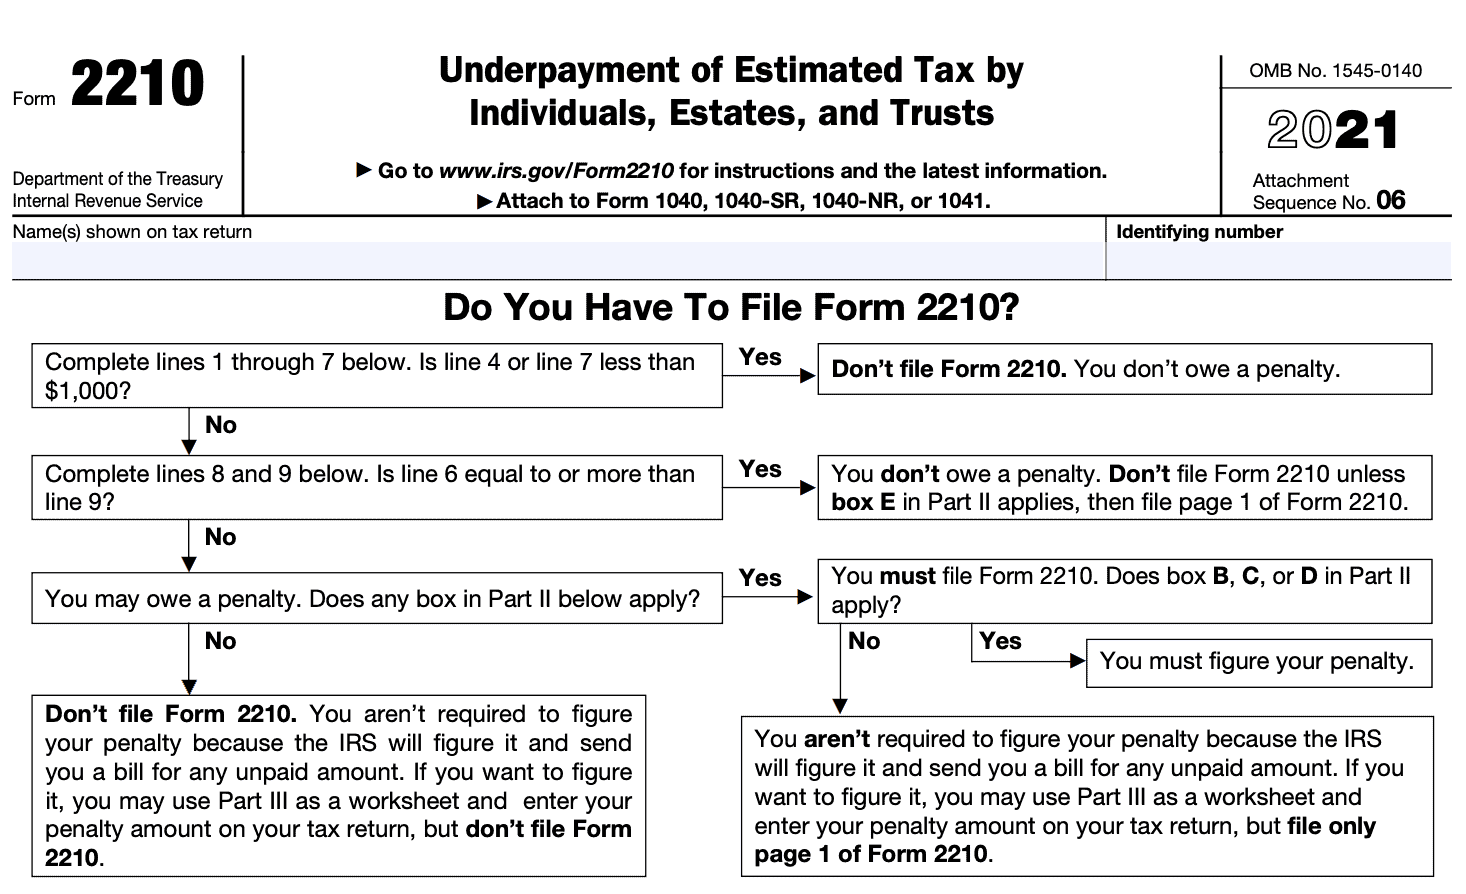 irs-form-2210-a-guide-to-underpayment-of-tax